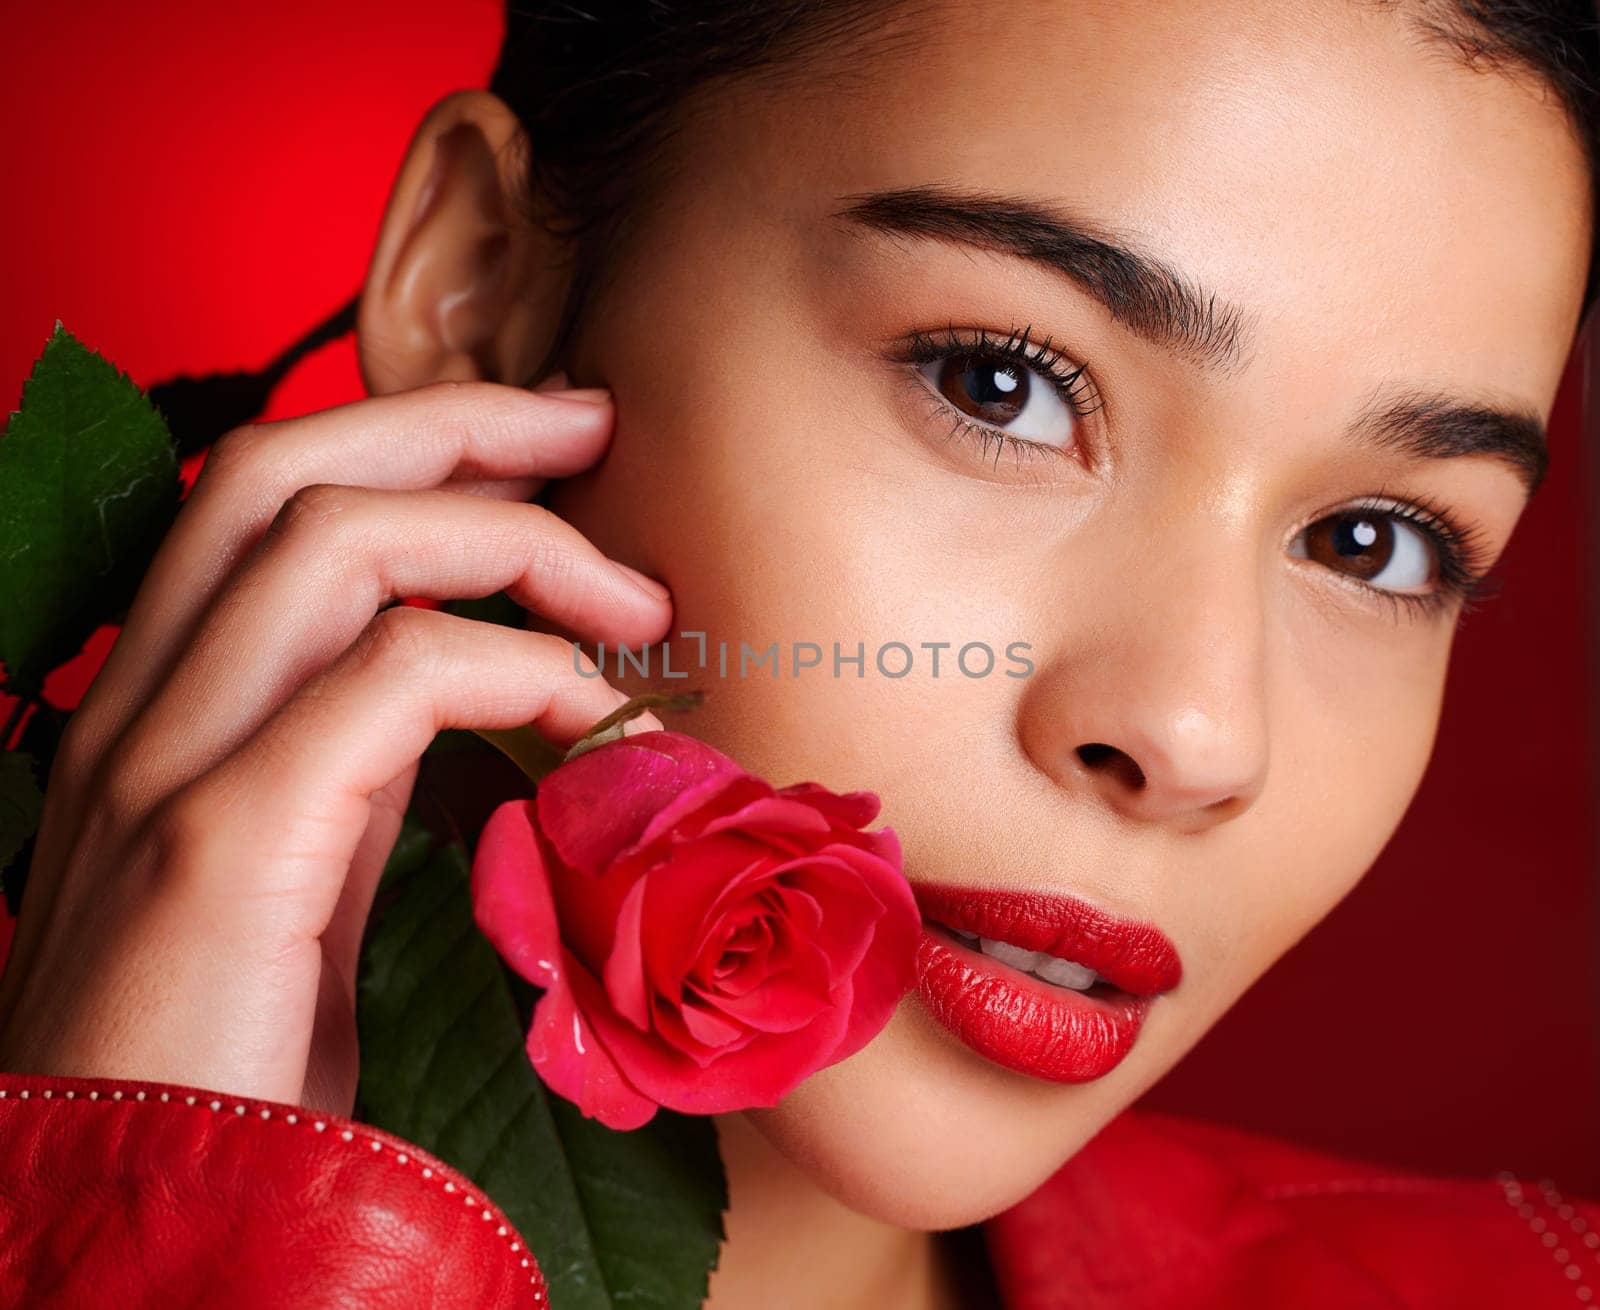 Portrait, beauty and red rose with a model woman holding a flower in studio on a wall background for valentines day. Face, romance and love with an attractive young female posing to promote dating.